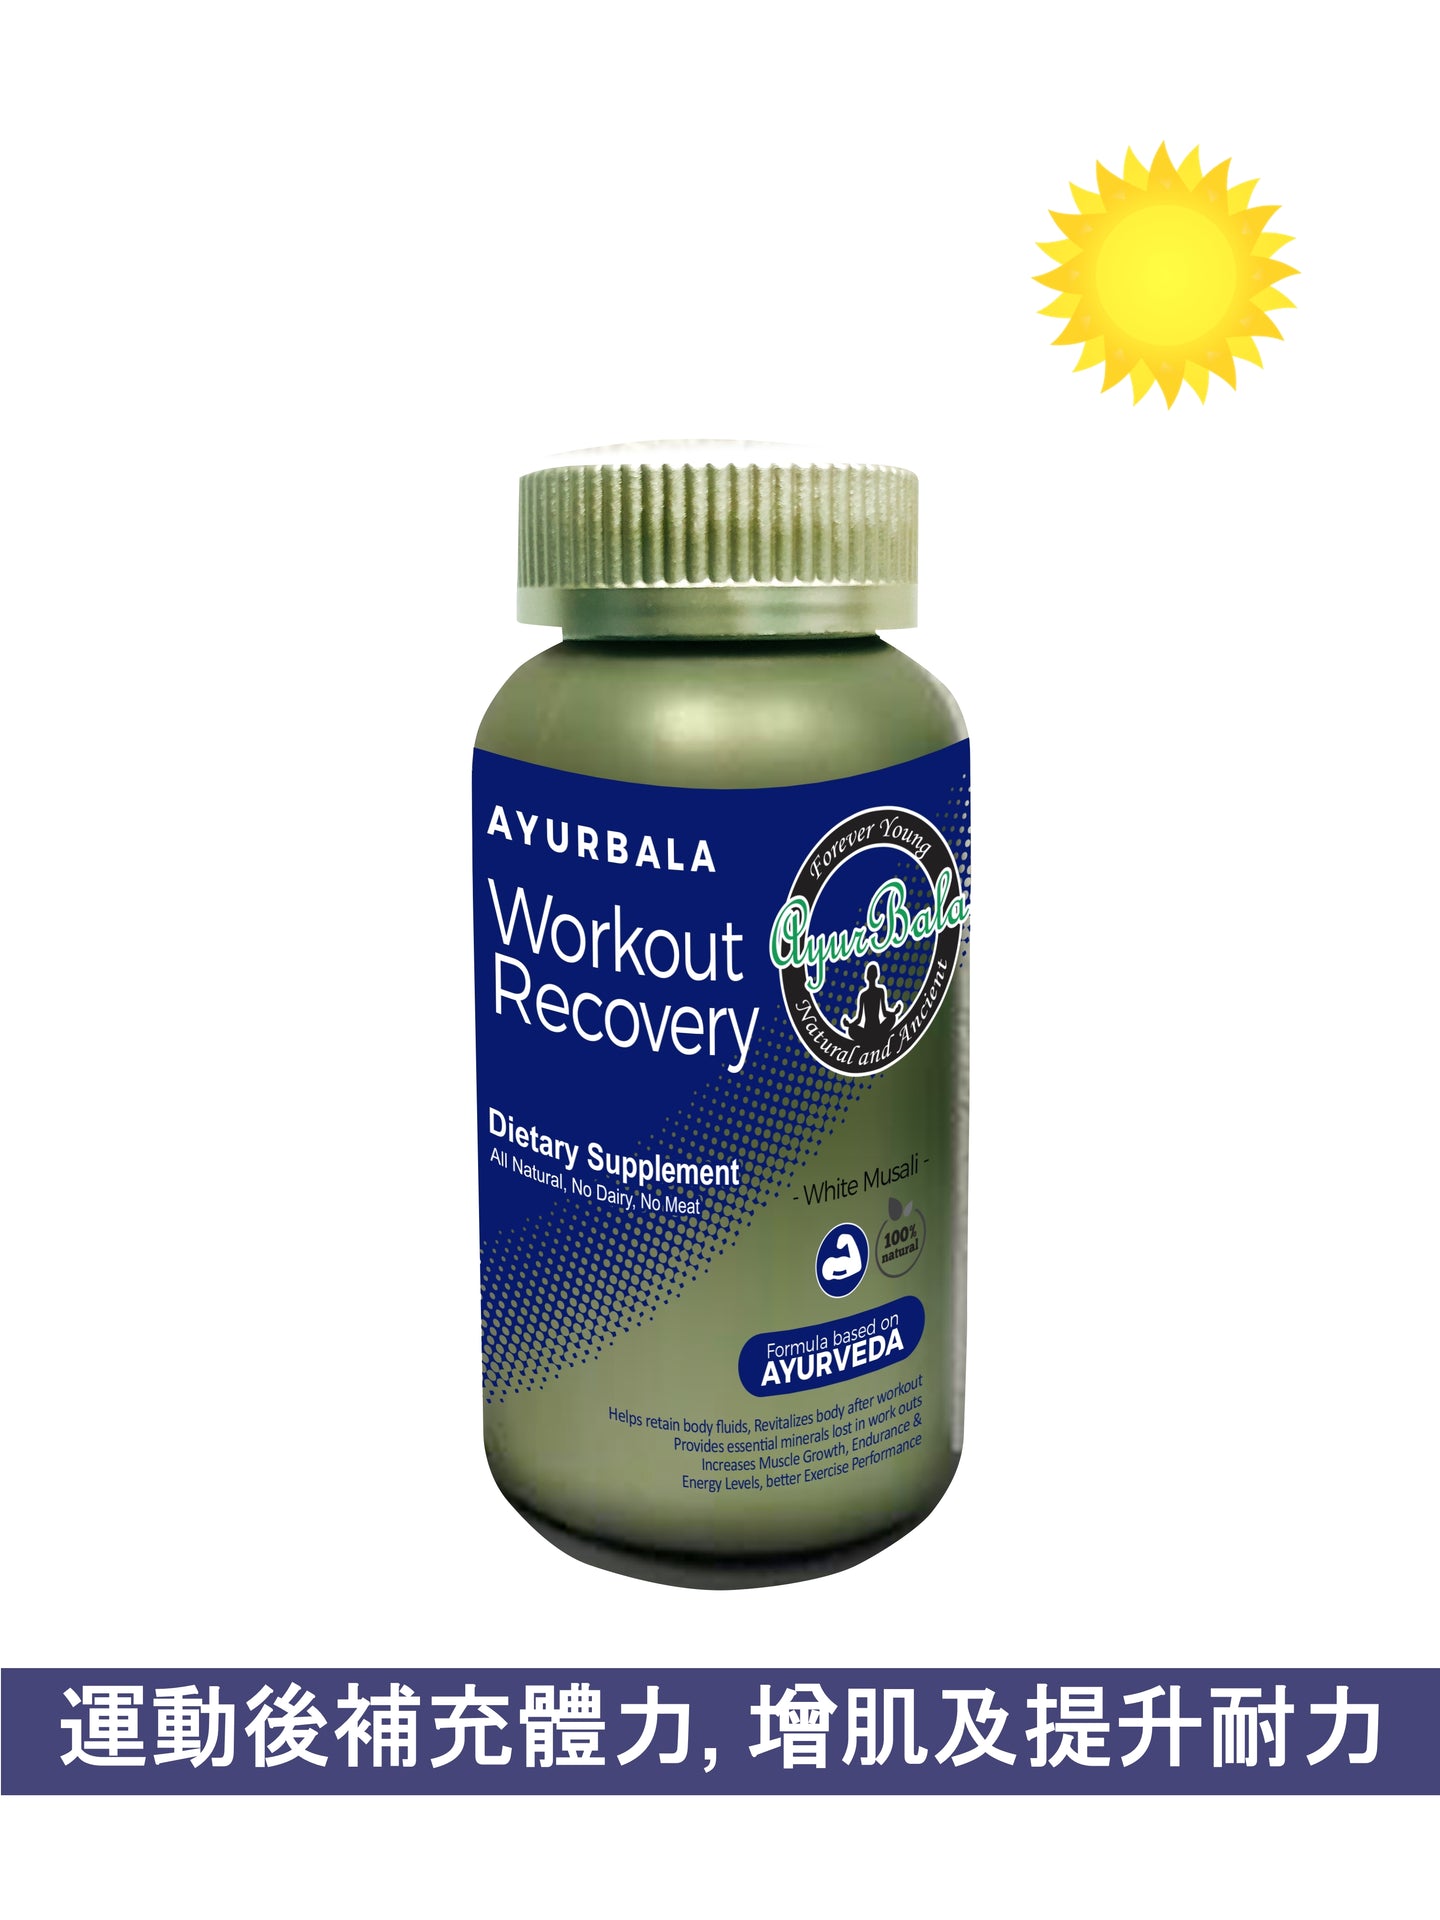 Workout Recovery  (Exercise Regularly and stay Healthy) (2 items 15% off, 3 item 35% off) Free Delivery in HK